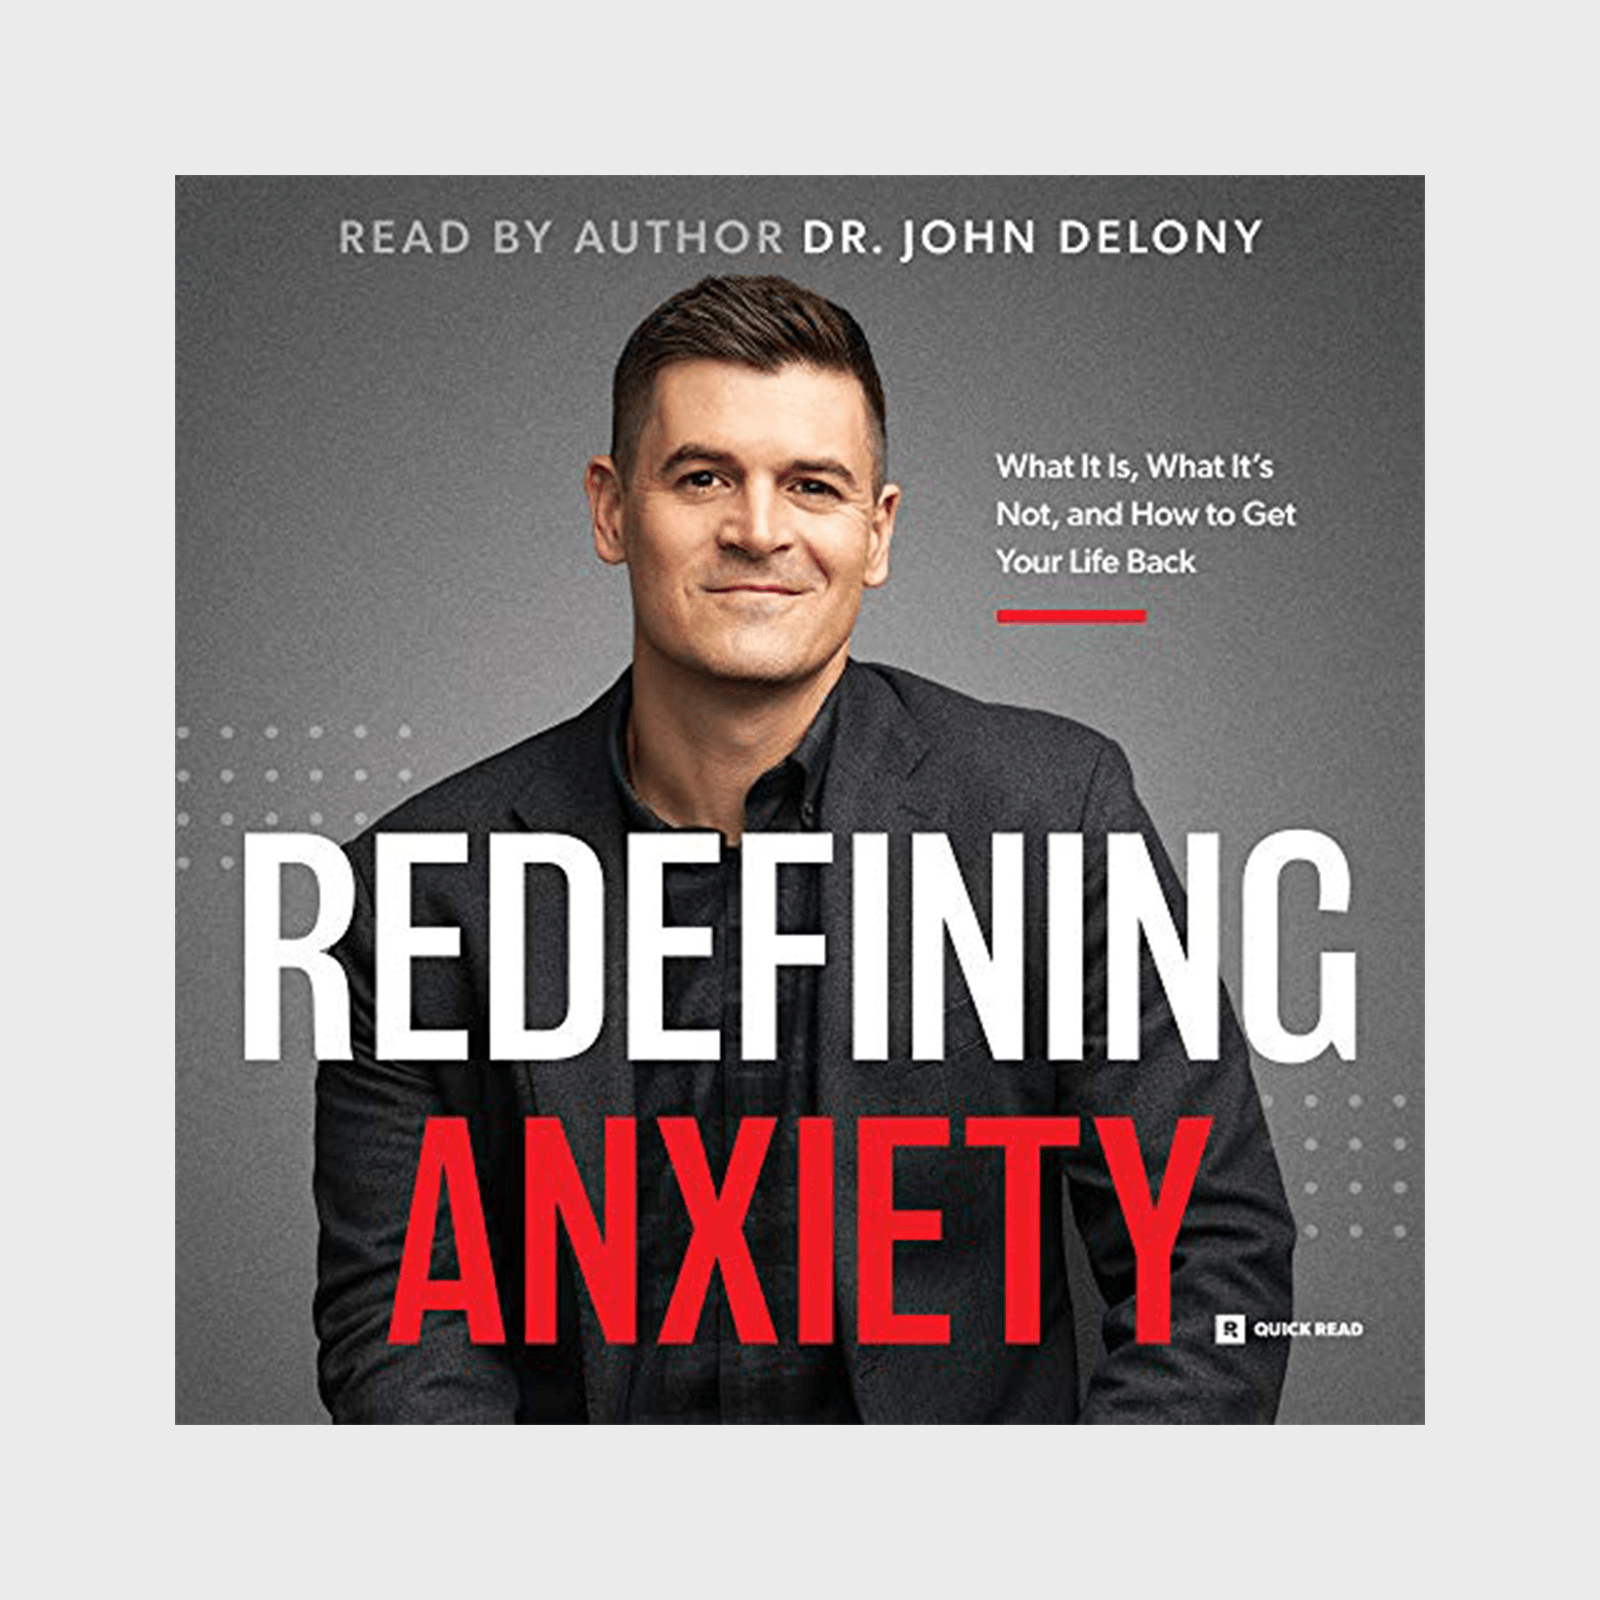 <h3><strong><em>Redefining Anxiety: What It Is, What It's Not, and How to Get Your Life Back</em> by Dr. John Delony</strong></h3> <p>Scratch everything you thought you knew about <a href="https://www.thehealthy.com/mental-health/anxiety/manage-anxiety/" rel="noopener noreferrer">how to deal with anxiety</a>: This is one of the best <a href="https://www.rd.com/list/best-self-help-books/" rel="noopener noreferrer">self-help books</a> to inspire and motivate you. Millions of people suffer from anxiety, and if you're one of them, author and narrator Dr. John Delony does a great job letting you know that you're not broken. In <a href="https://www.amazon.com/Redefining-Anxiety-What-Isnt-Your/dp/B08PL37912/" rel="noopener noreferrer"><em>Redefining Anxiety</em></a>, he breaks down our culture's myths about anxiety, practical steps you can take to reclaim your life and calm what he refers to as your body's alarm system, and long-term strategies for moving forward.</p> <p class="listicle-page__cta-button-shop"><a class="shop-btn" href="https://www.amazon.com/Redefining-Anxiety-What-Isnt-Your/dp/B08PL37912">Shop Now</a></p>